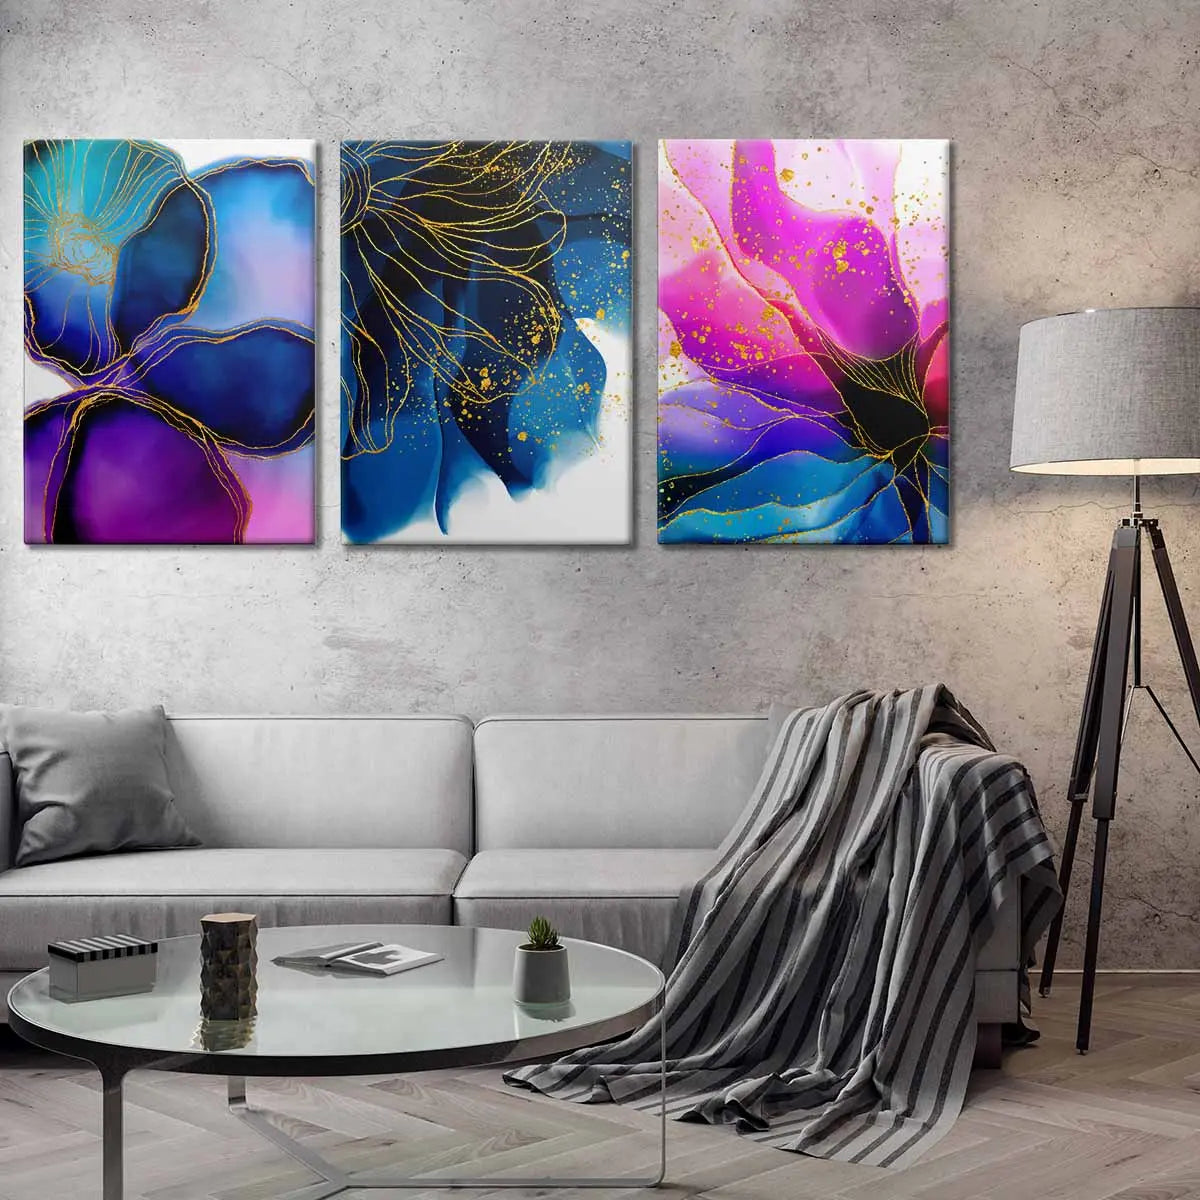 "ABSTRACT FLOWERS" - Art For Everyone